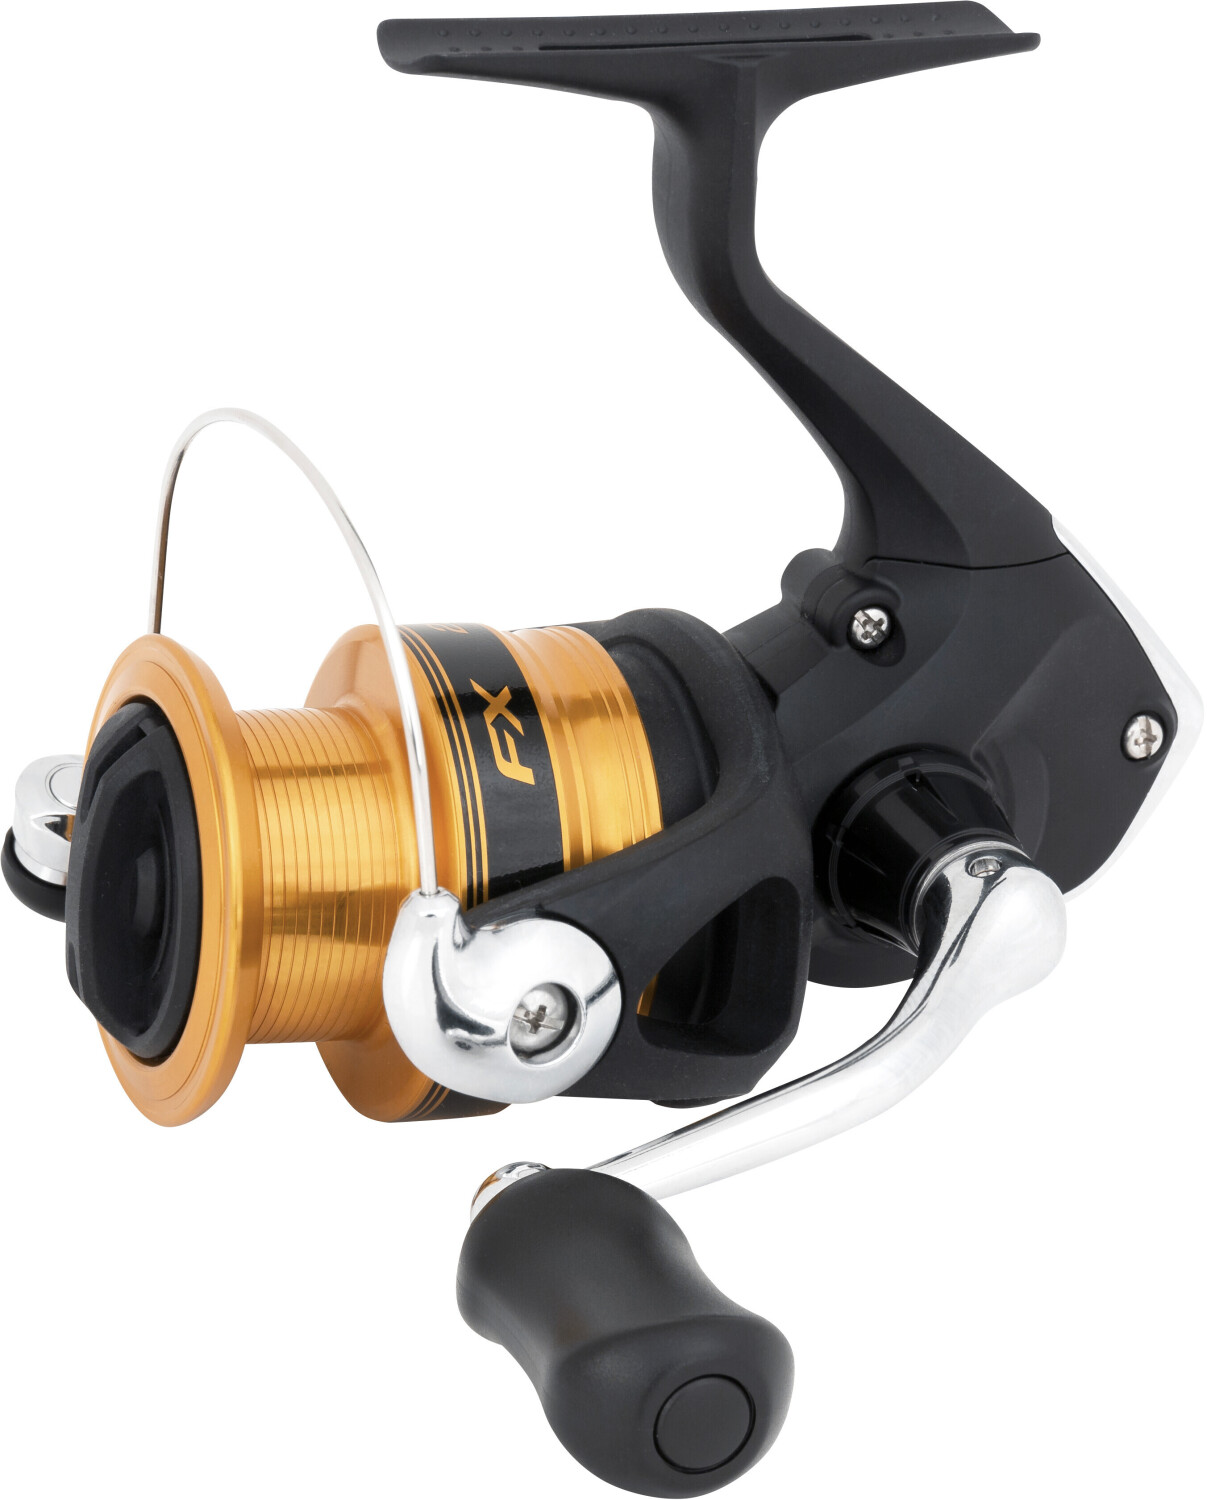 Buy Shimano Reel FX FC from £13.99 (Today) – Best Deals on